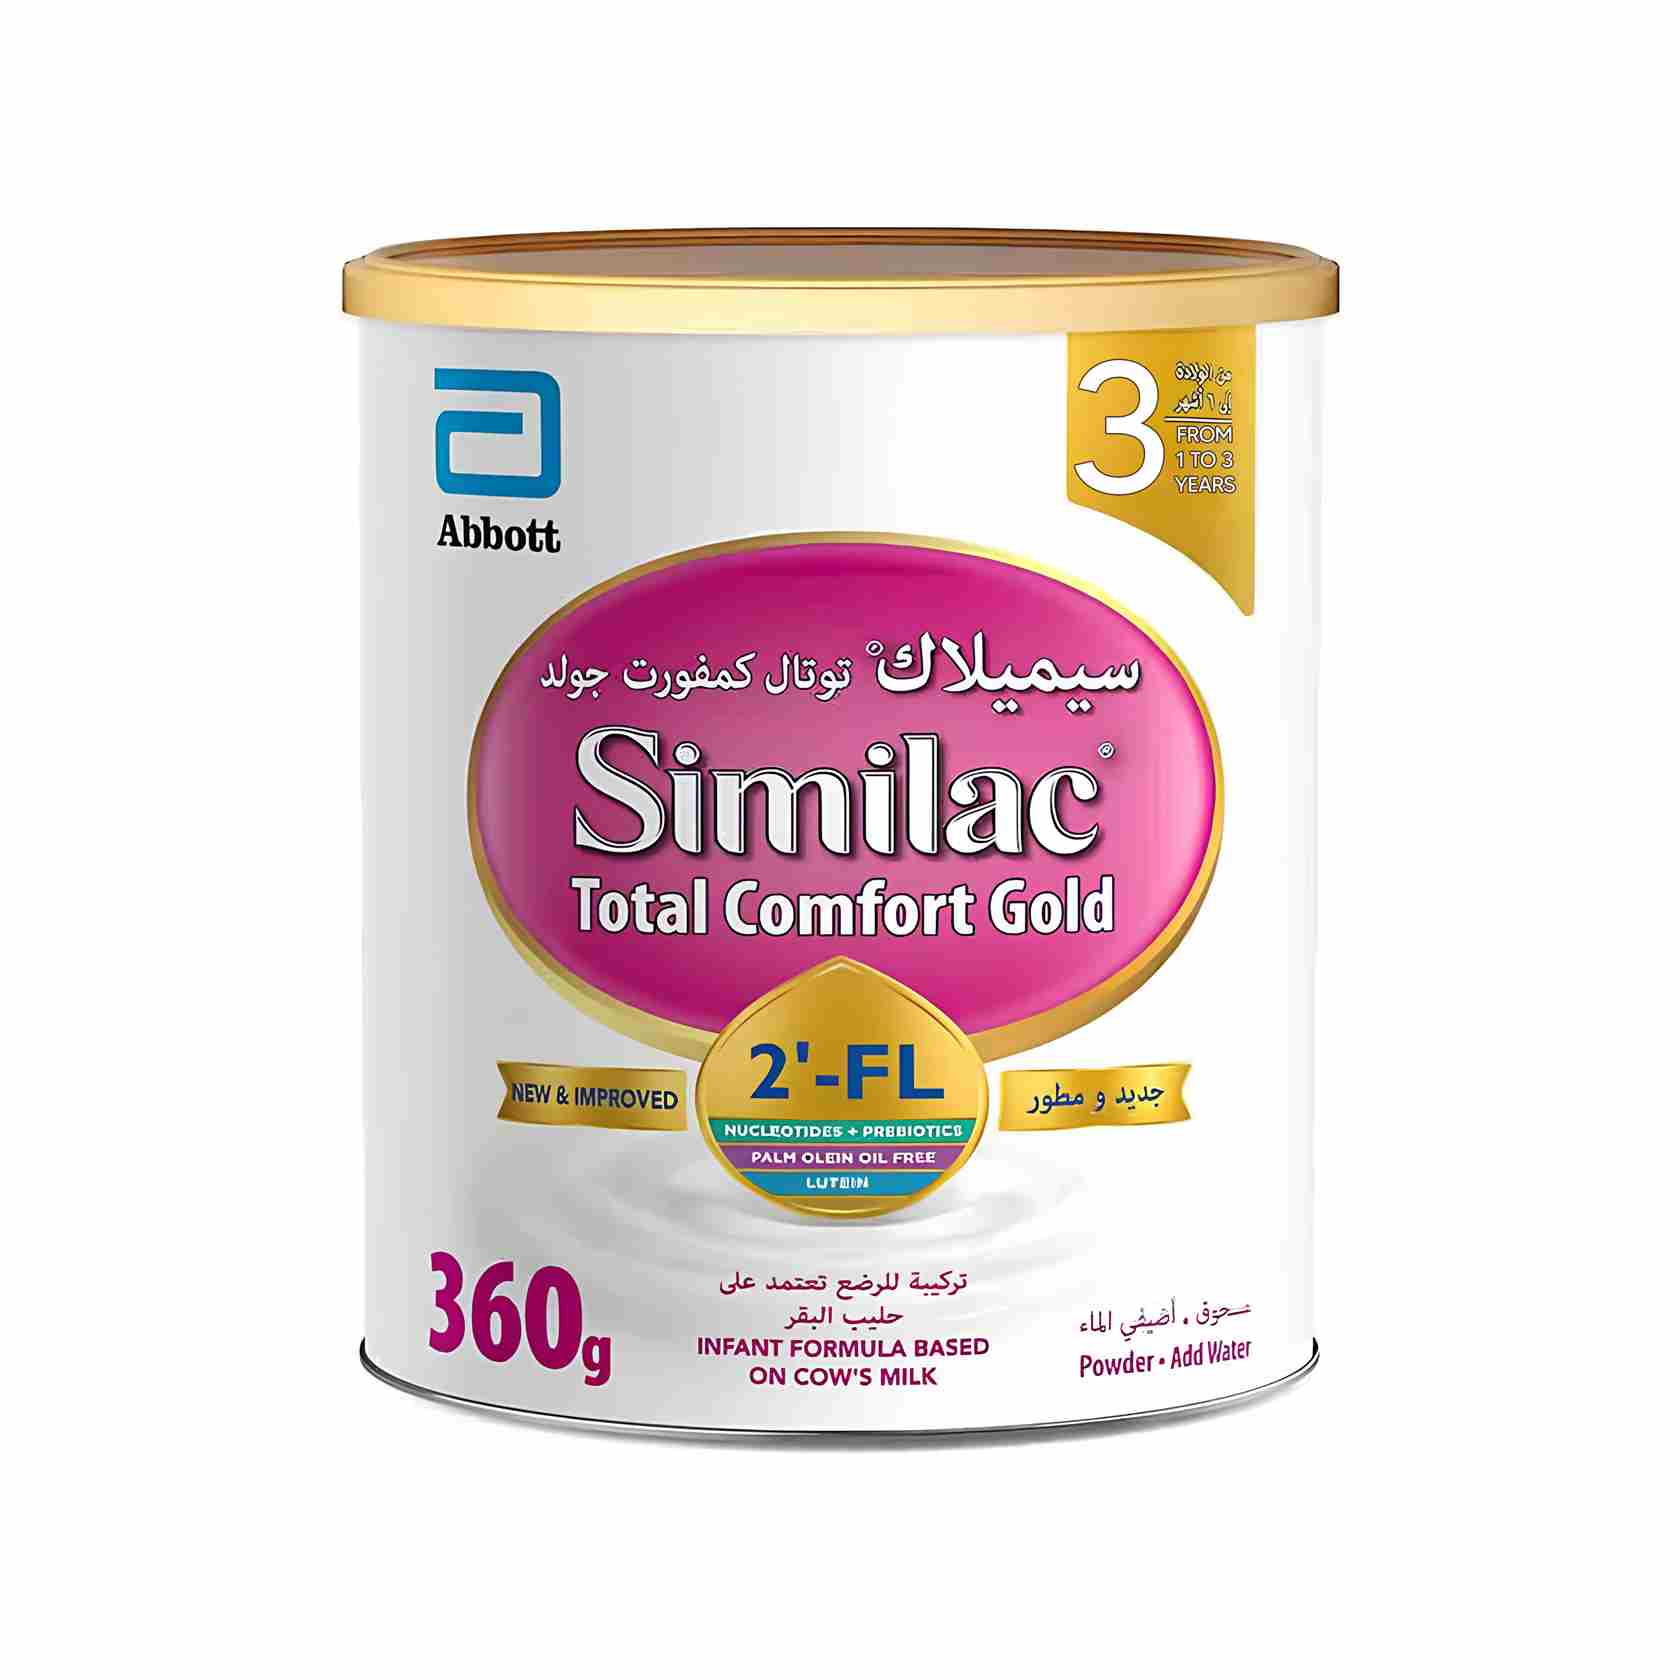 Buy Abbott Similac Total Comfort Gold Baby Milk Formula, Stage-3 Online in India at uyyaala.com